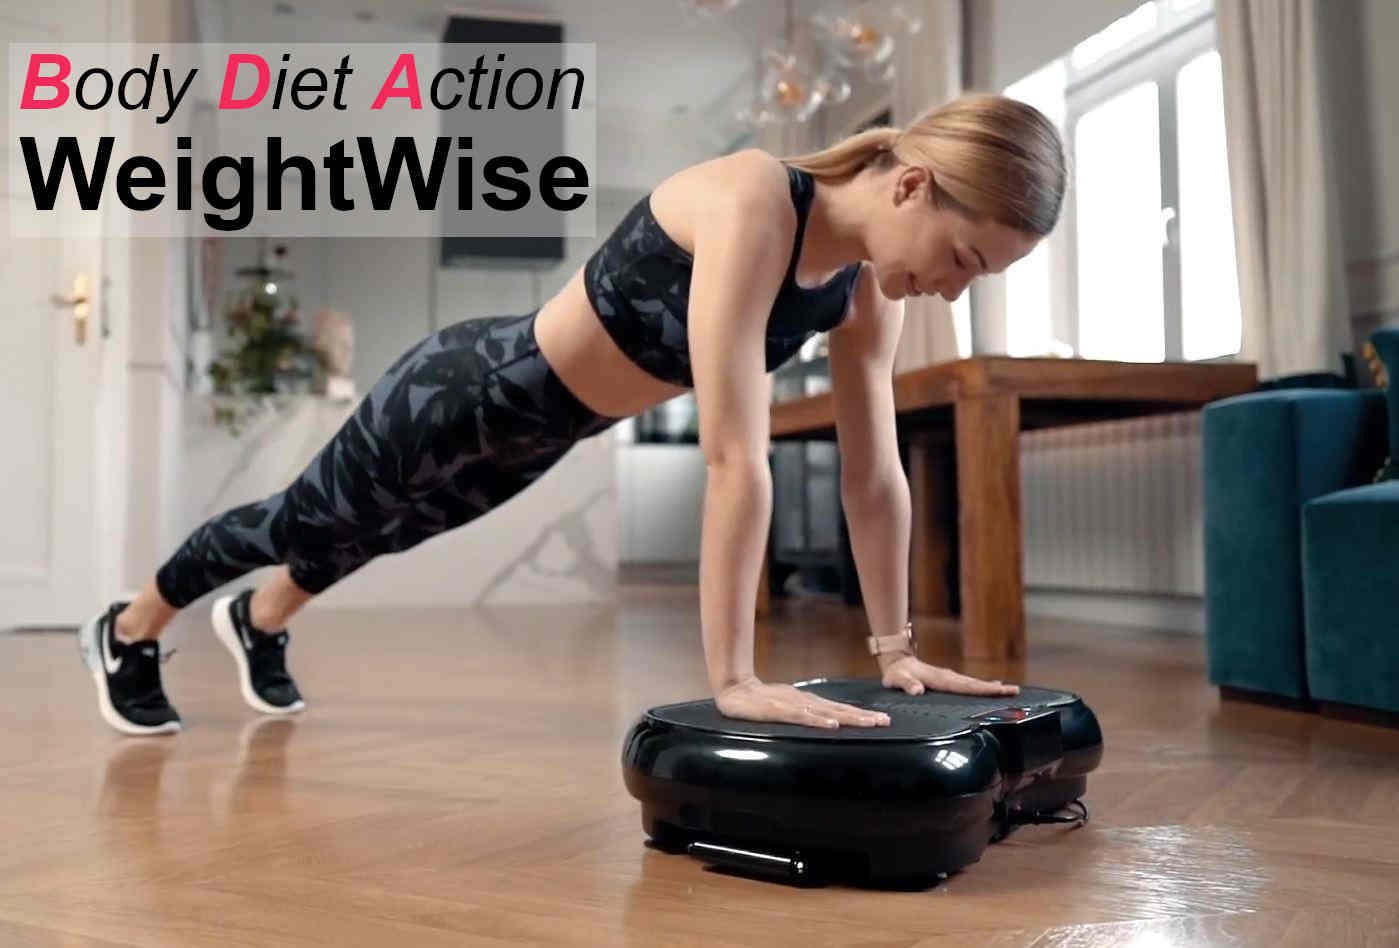 Get Rid Of Belly Fat With 10 Great Vibration Plate Exercises – DMoose